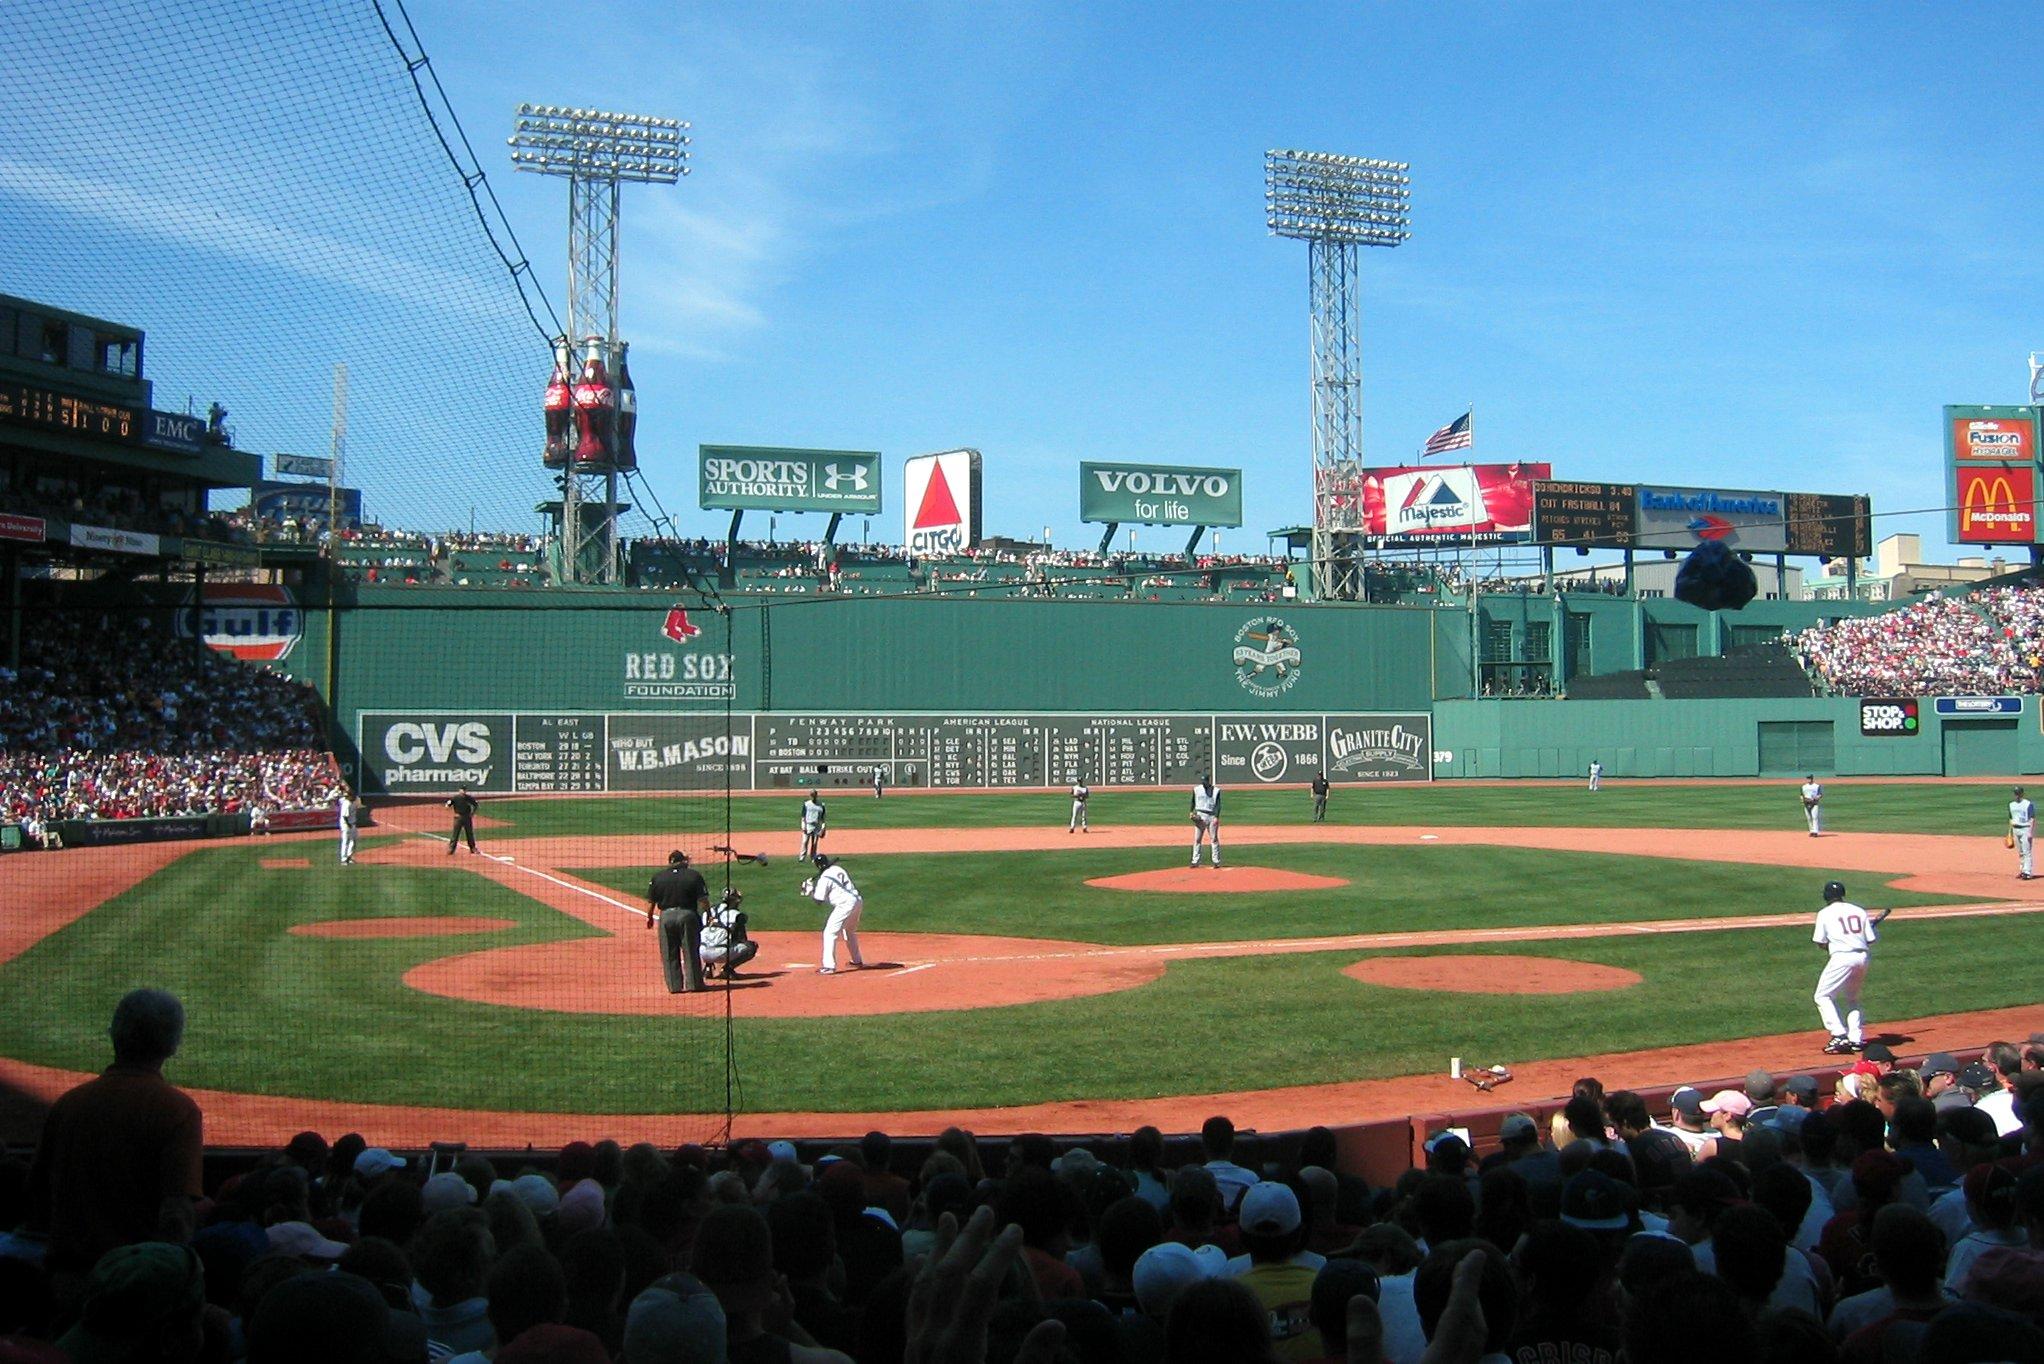 Skies Cleared For Red Sox Home Opener at Fenway | Rhode Island ...